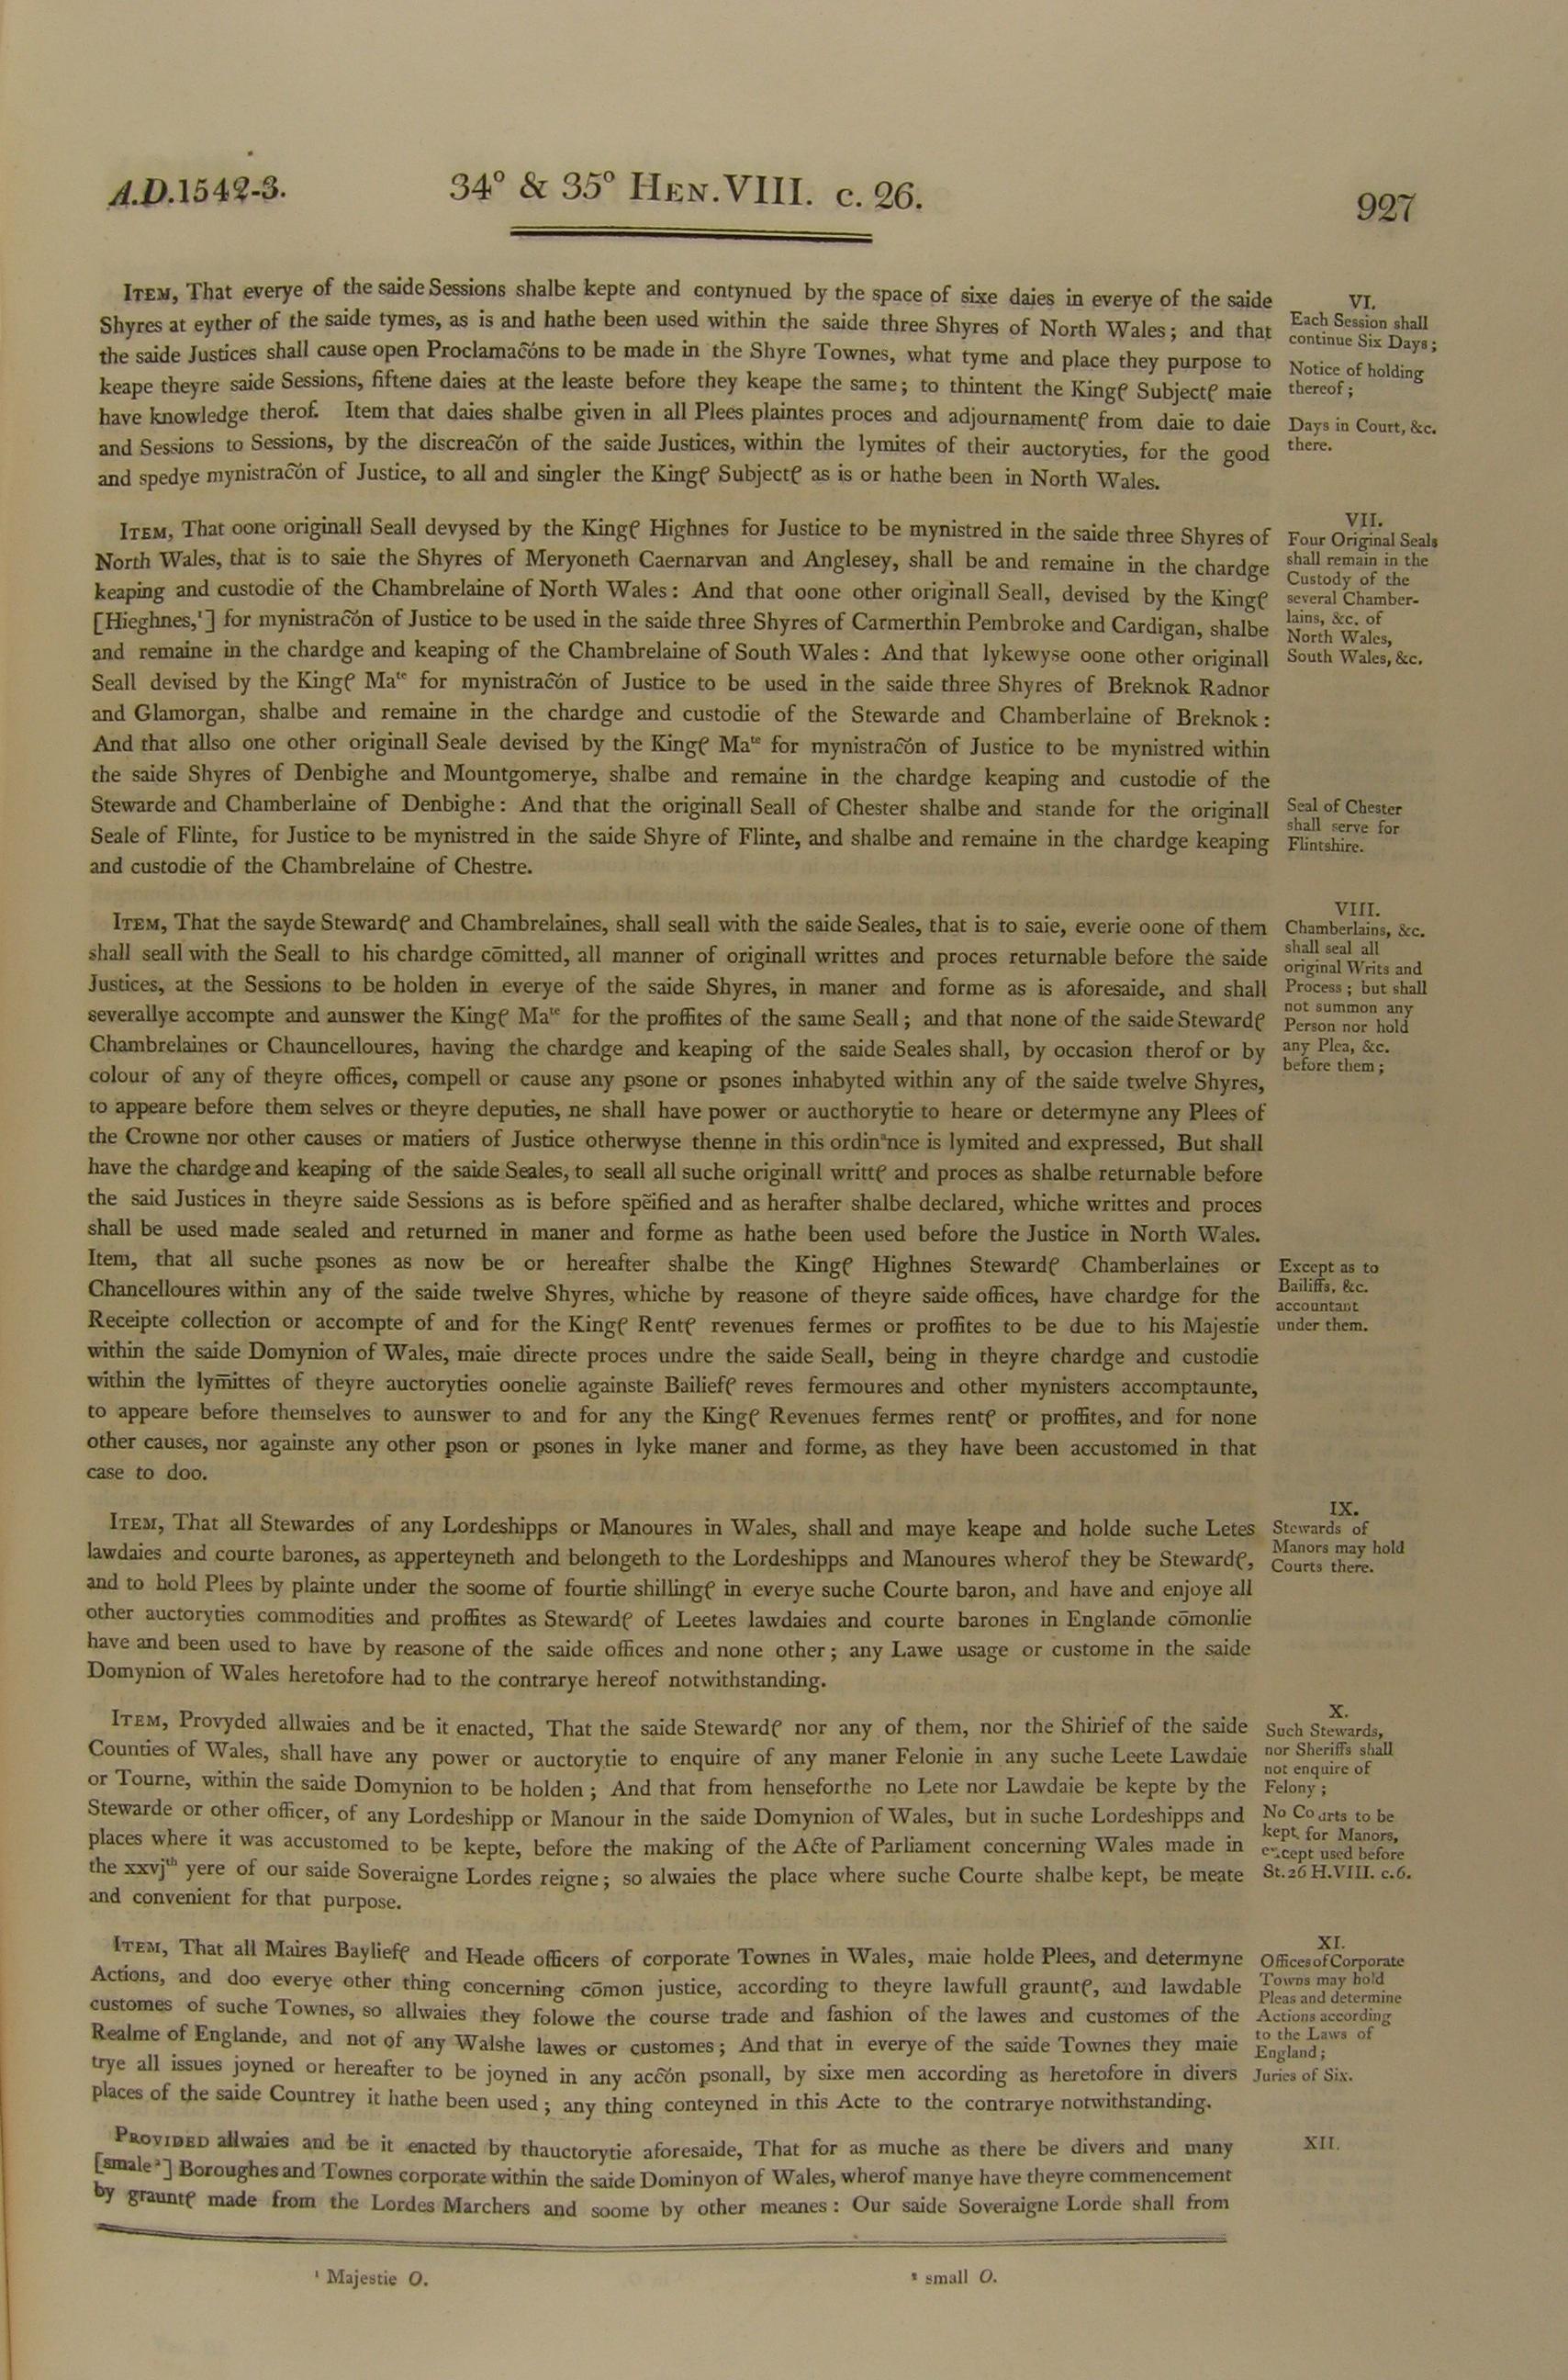 Image of 34 & 35 Henry VIII, c. 26 (page 2 of 12). Click for larger image.